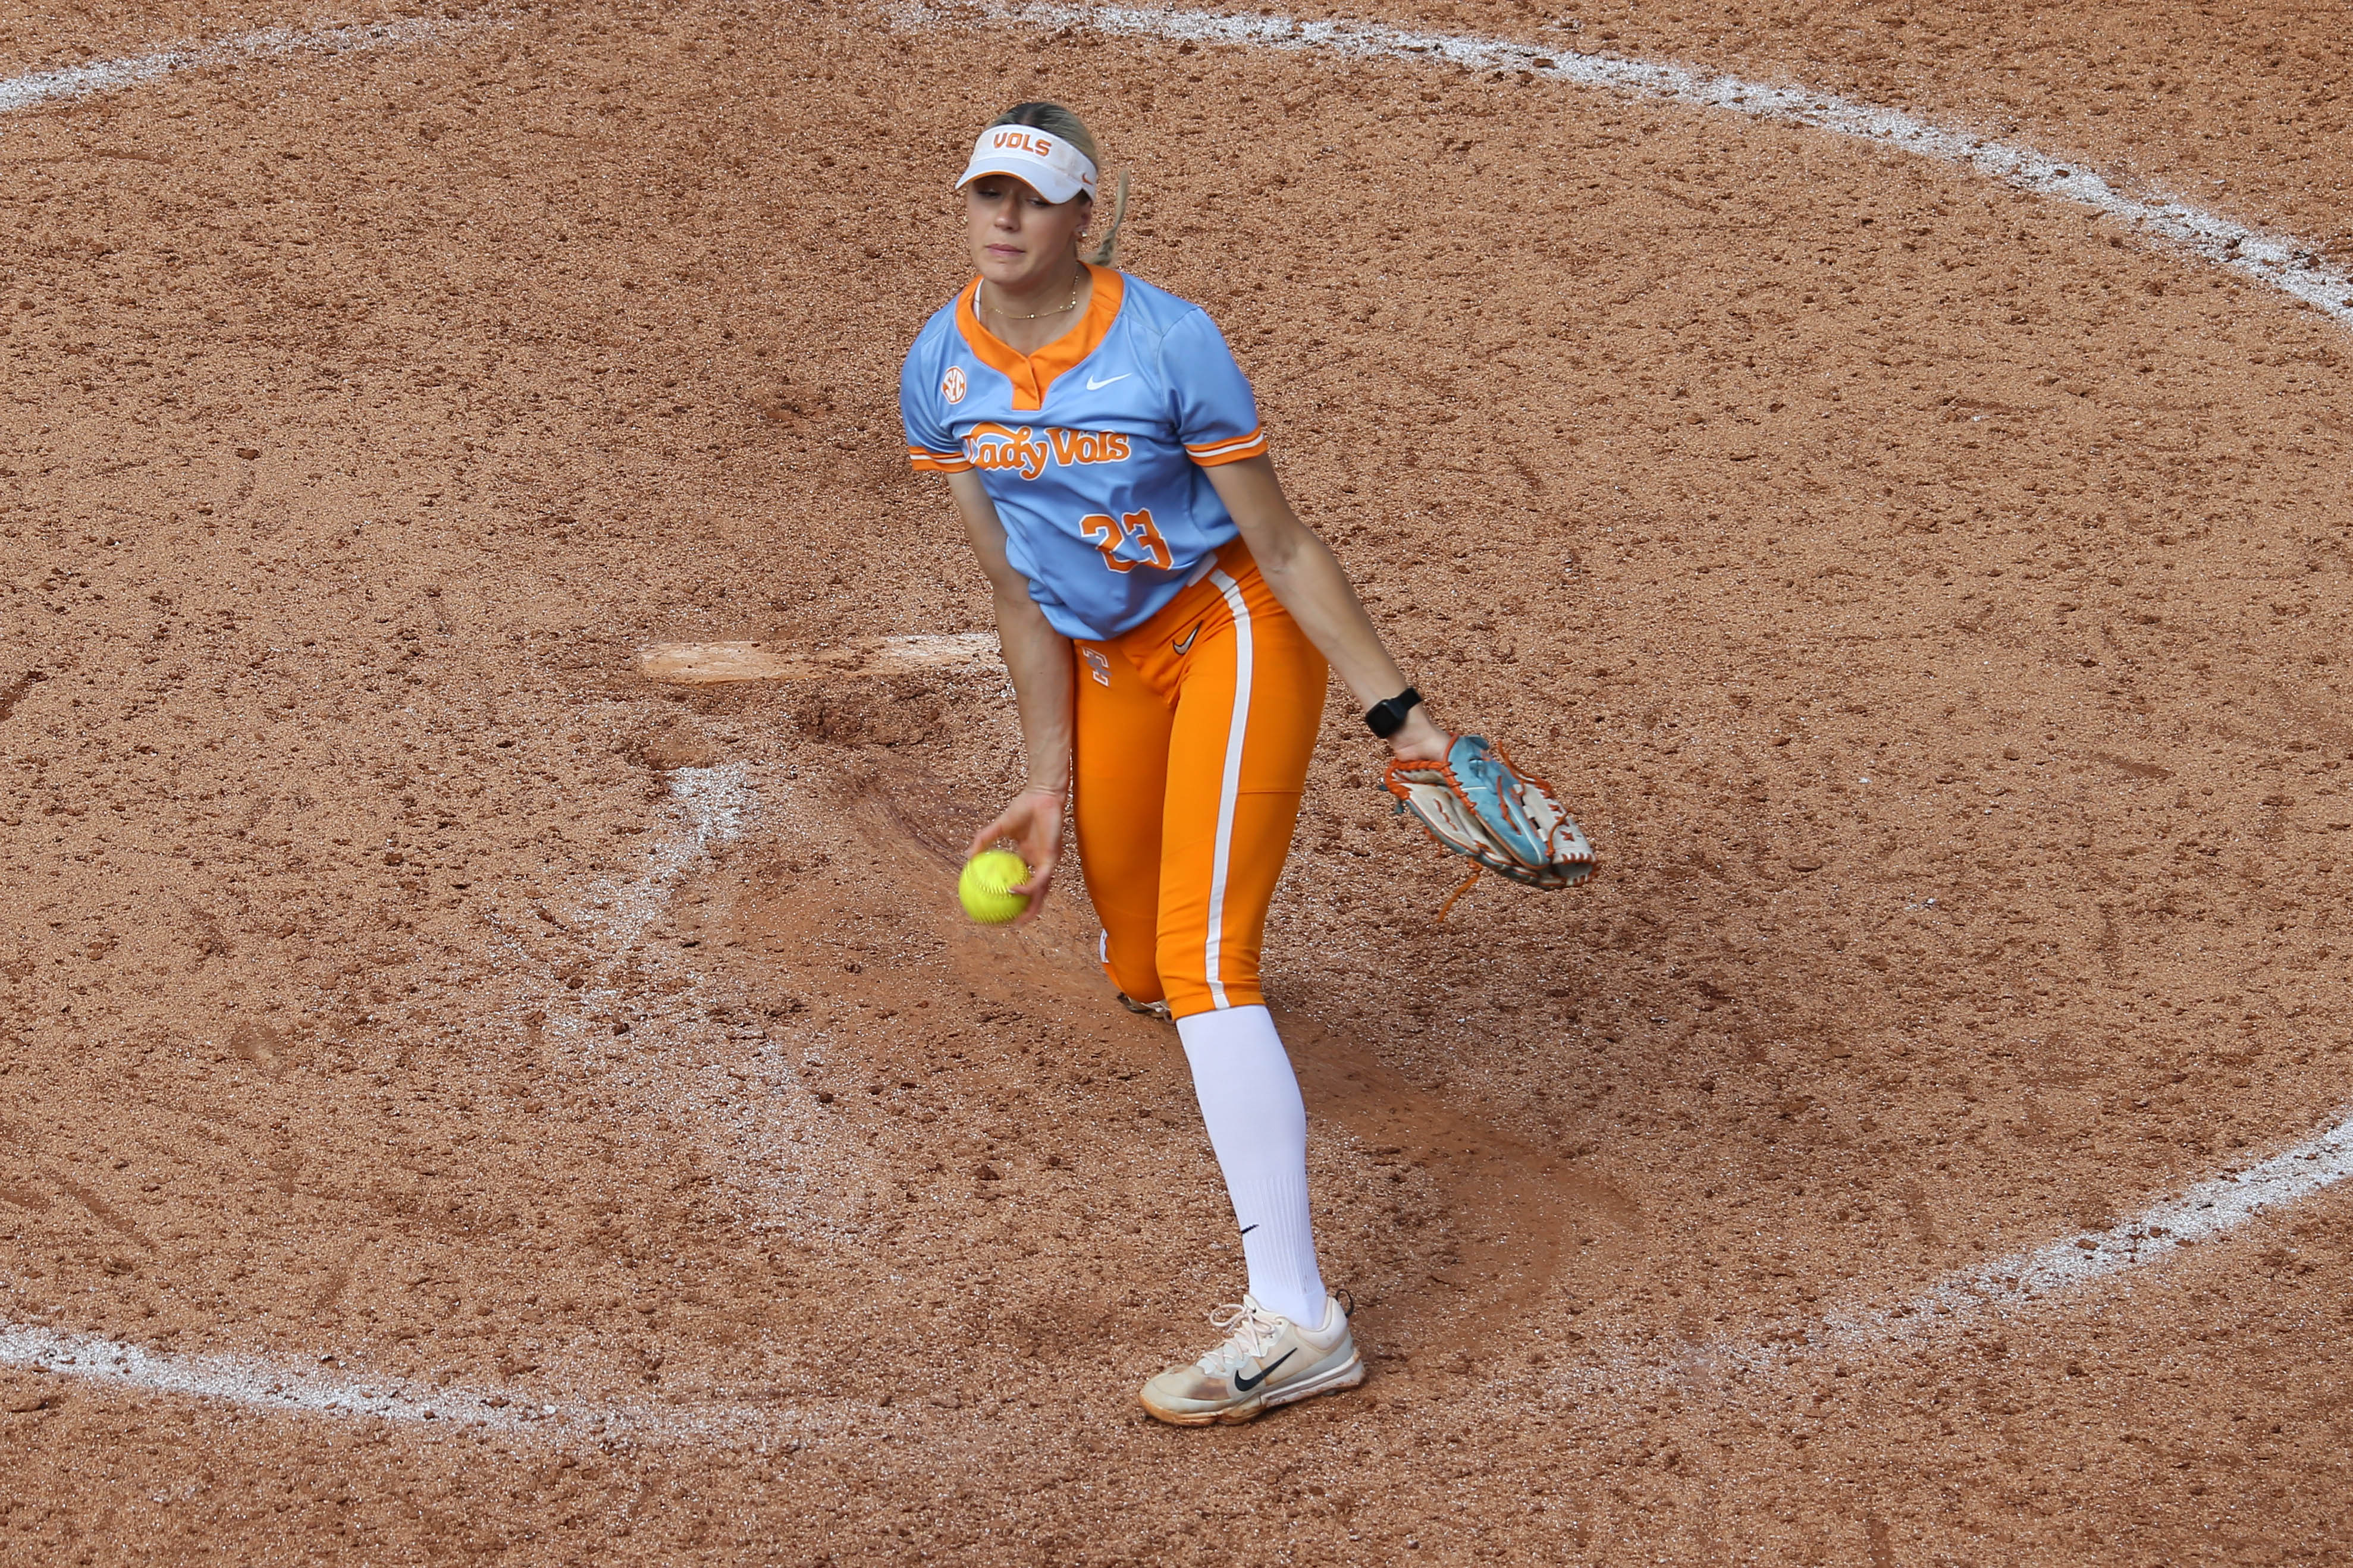 Tennessee softball's attempt to repeat history ends with upset by LSU in SEC tournament